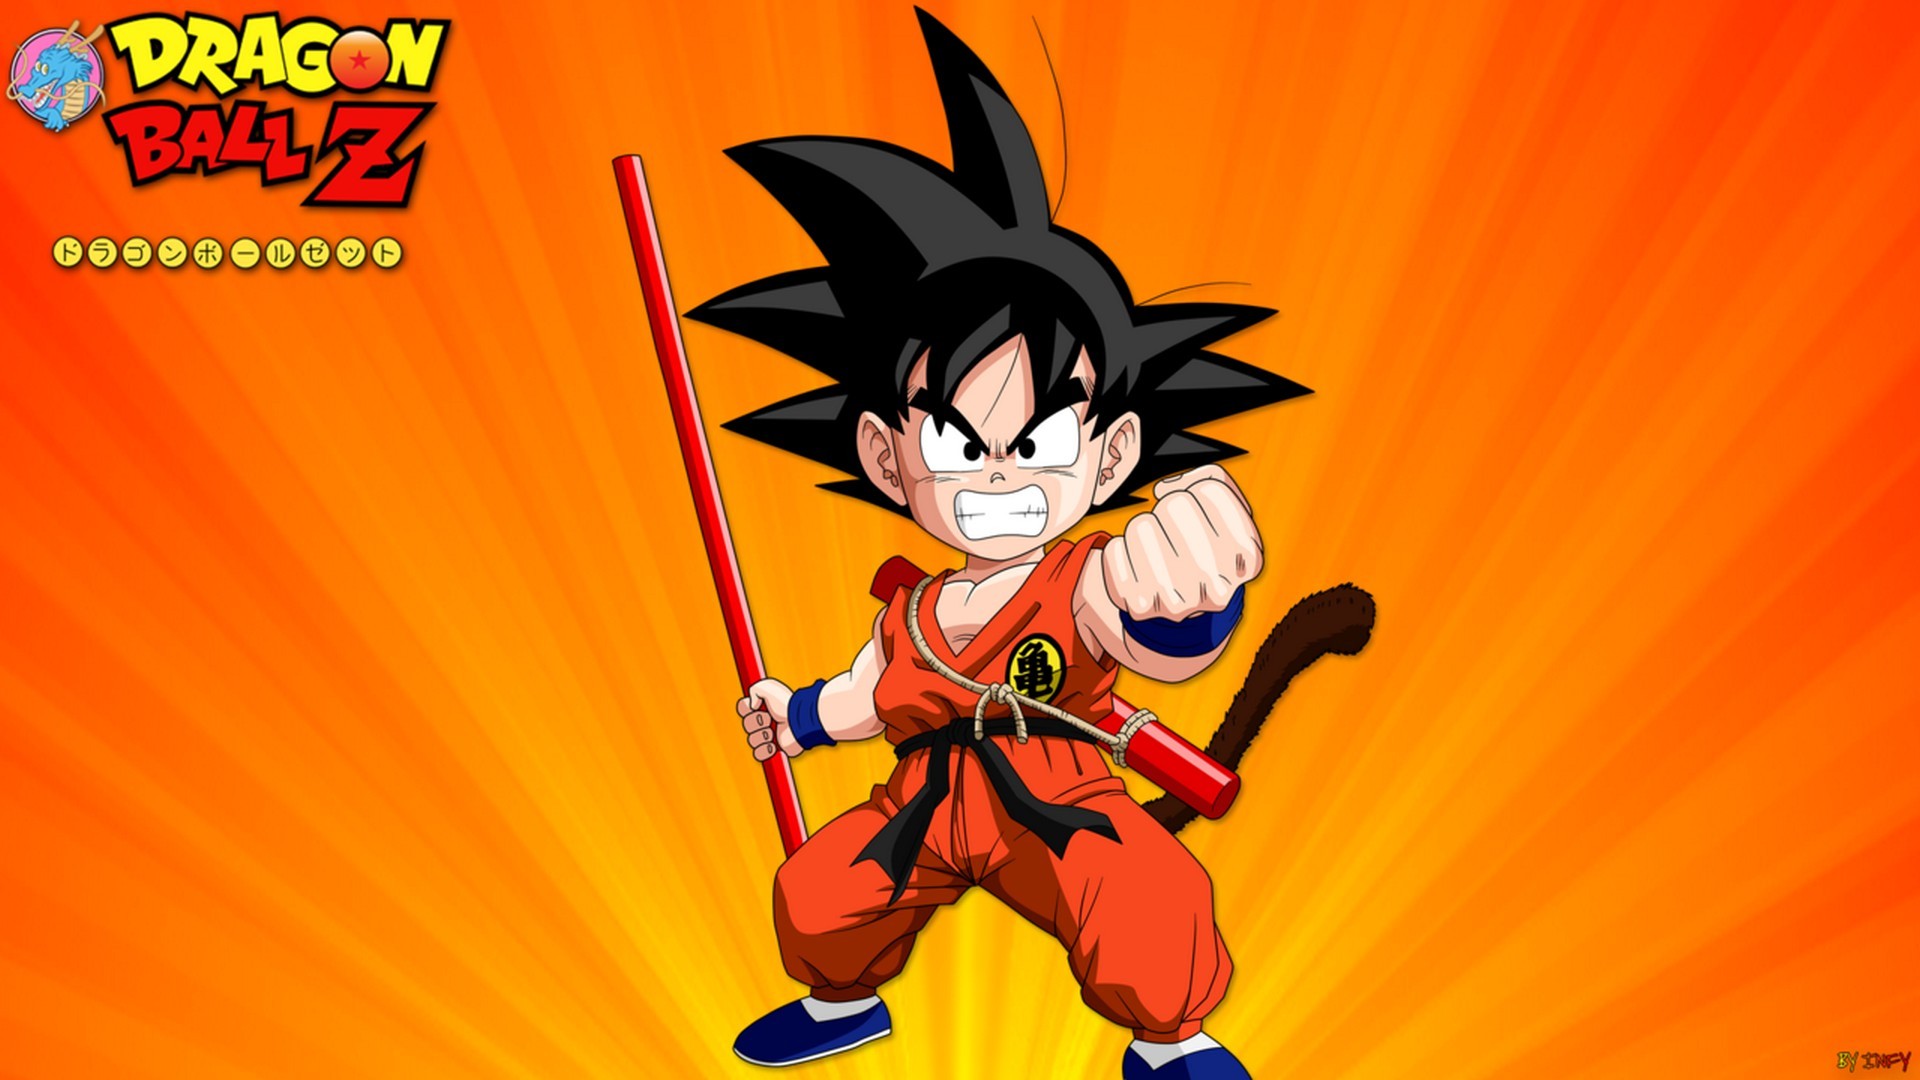 Kid Goku Desktop Backgrounds HD with resolution 1920X1080 pixel. You can use this wallpaper as background for your desktop Computer Screensavers, Android or iPhone smartphones